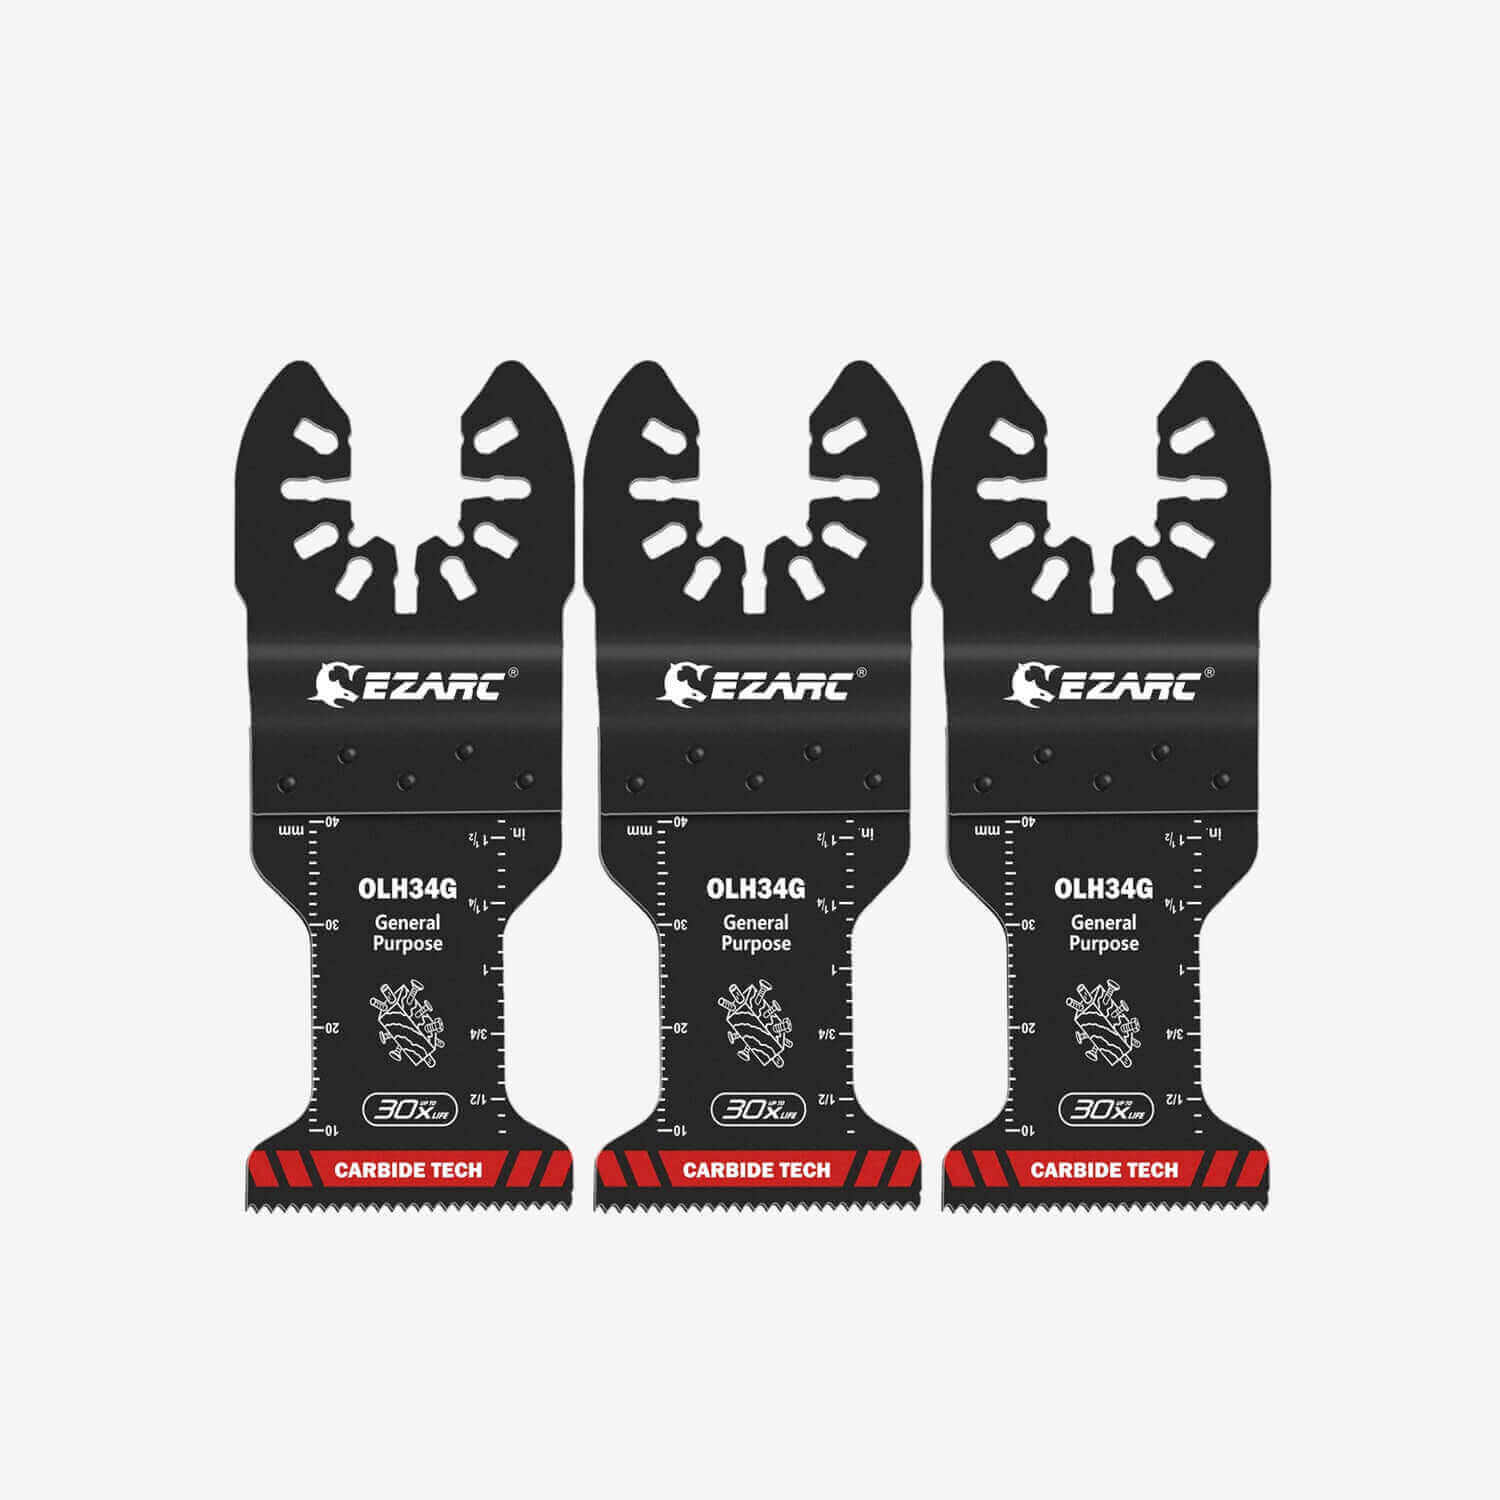 EZARC Oscillating Tool Blades Carbide Multitool Saw Blades for Hard Material Hardened Metal Nails Bolts and Screws 3-Pack